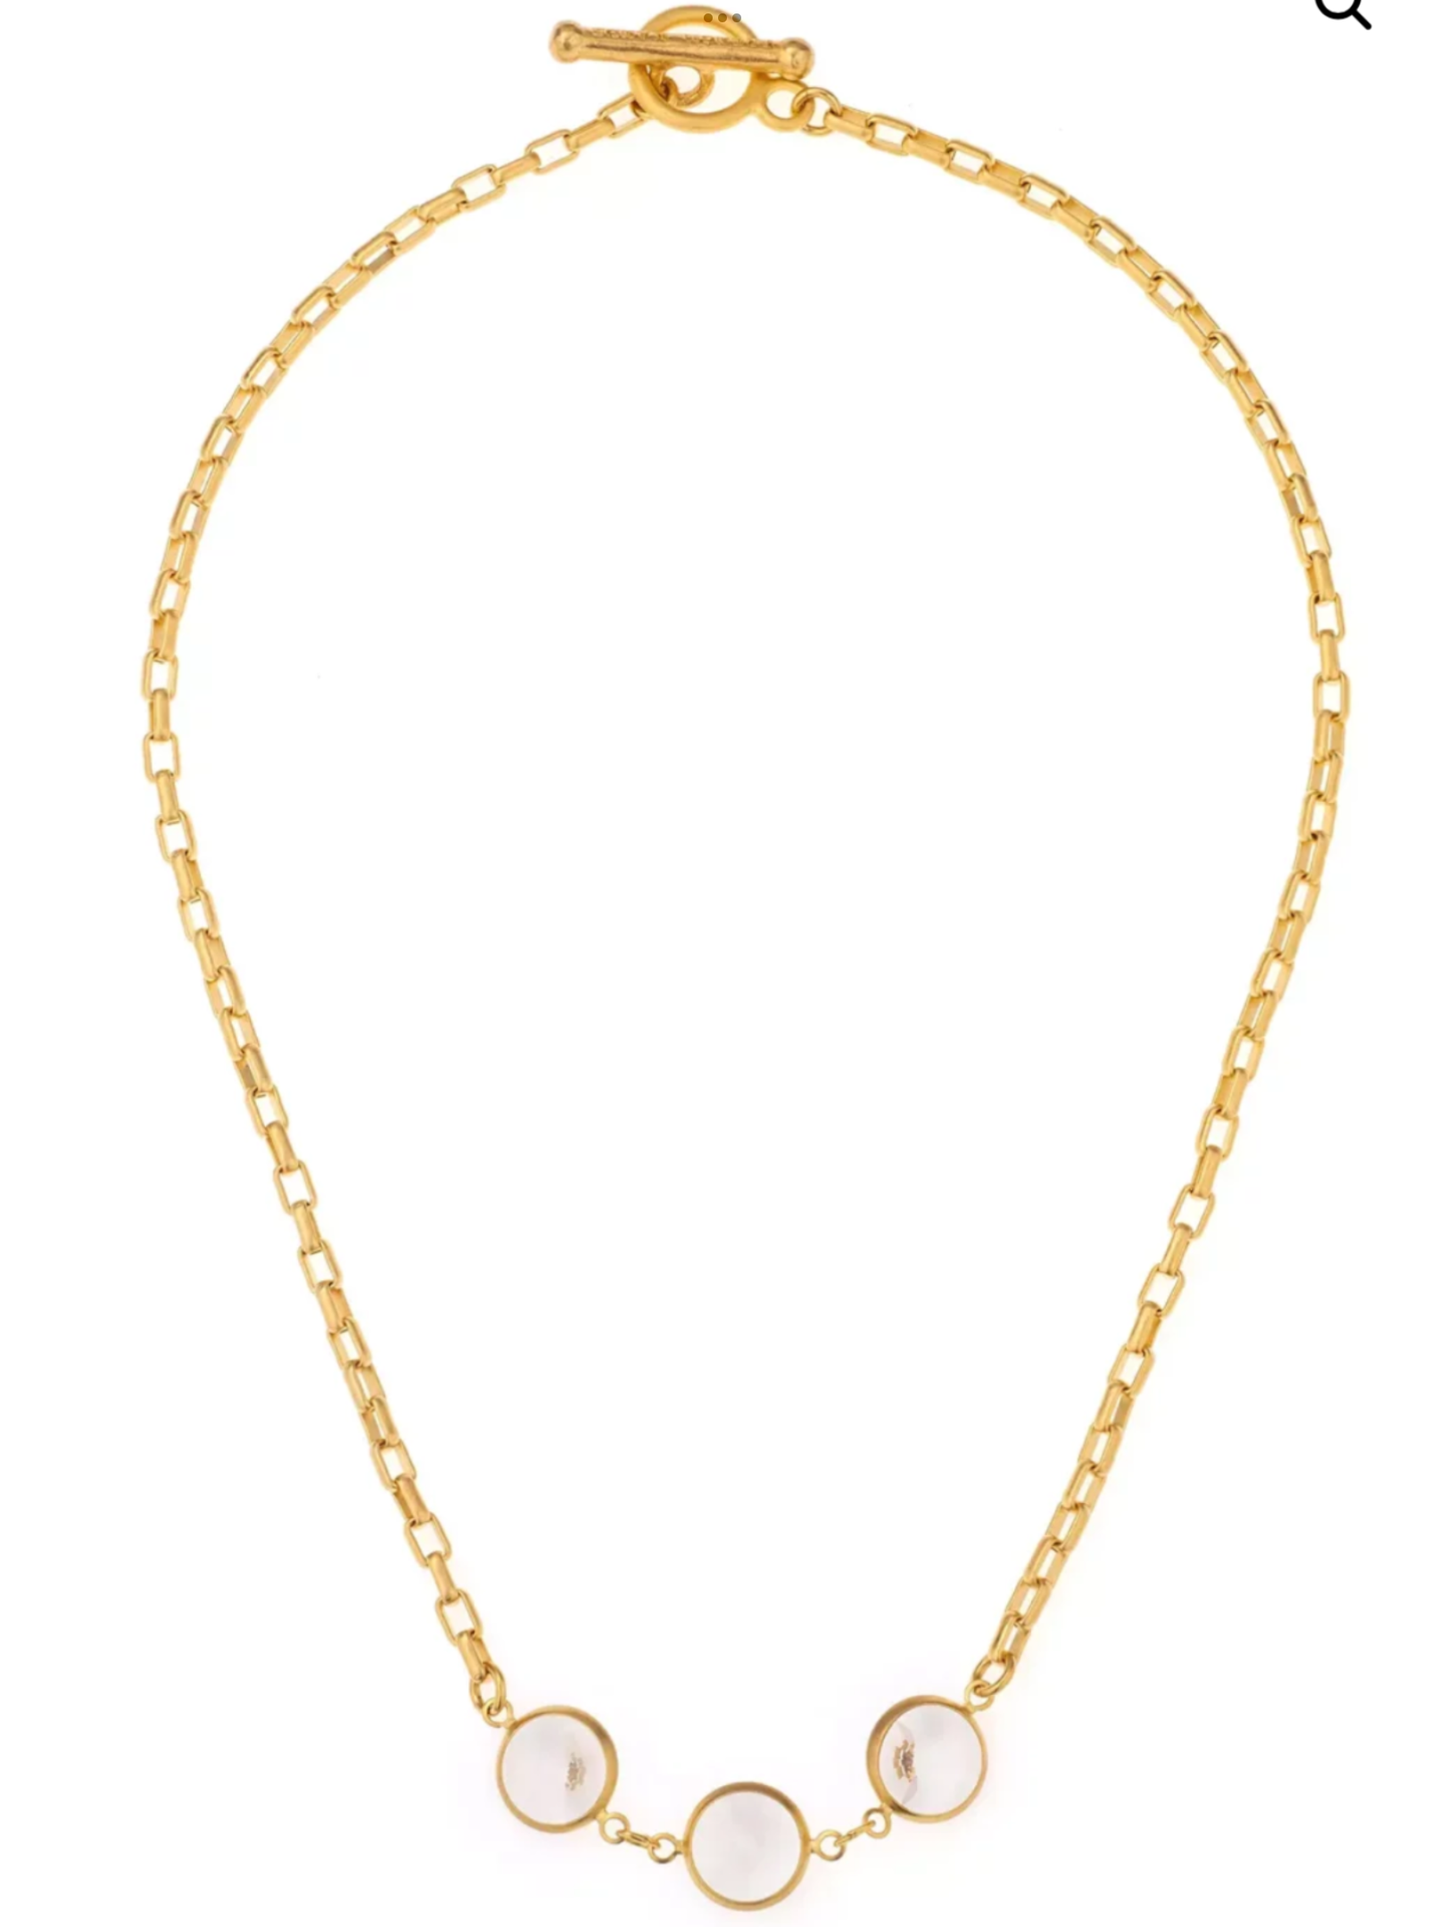 The Blisse Necklace